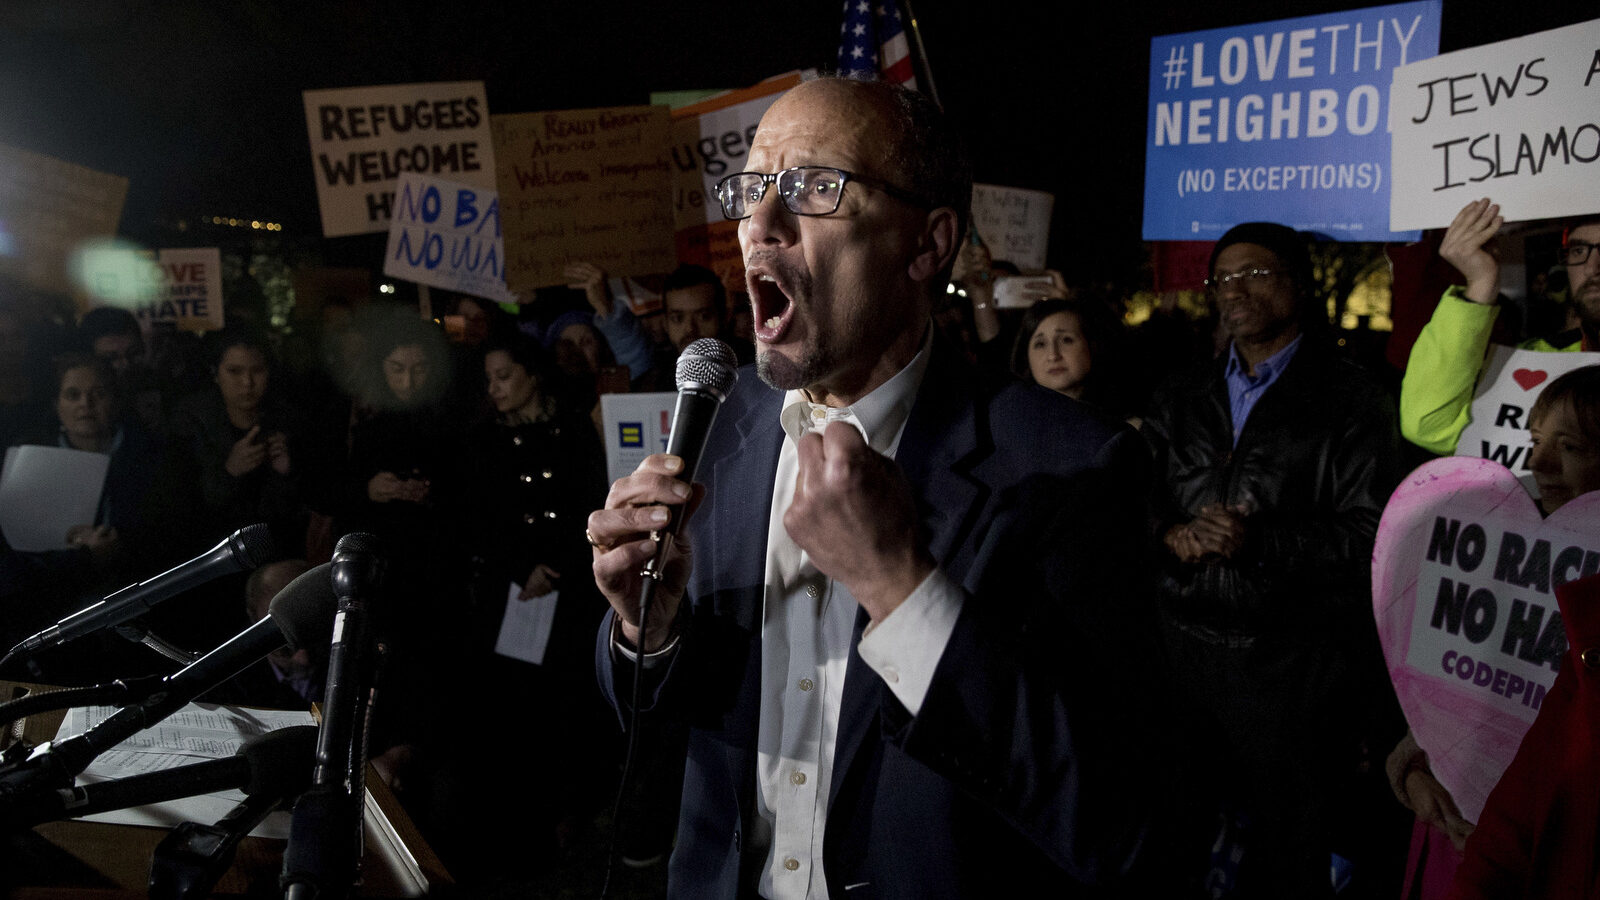 Democratic National Committee (DNC) Chairman Tom Perez speaks at a protest against President Donald Trump's travel ban in Lafayette Square outside the White House, March 6, 2017. (AP/Andrew Harnik)